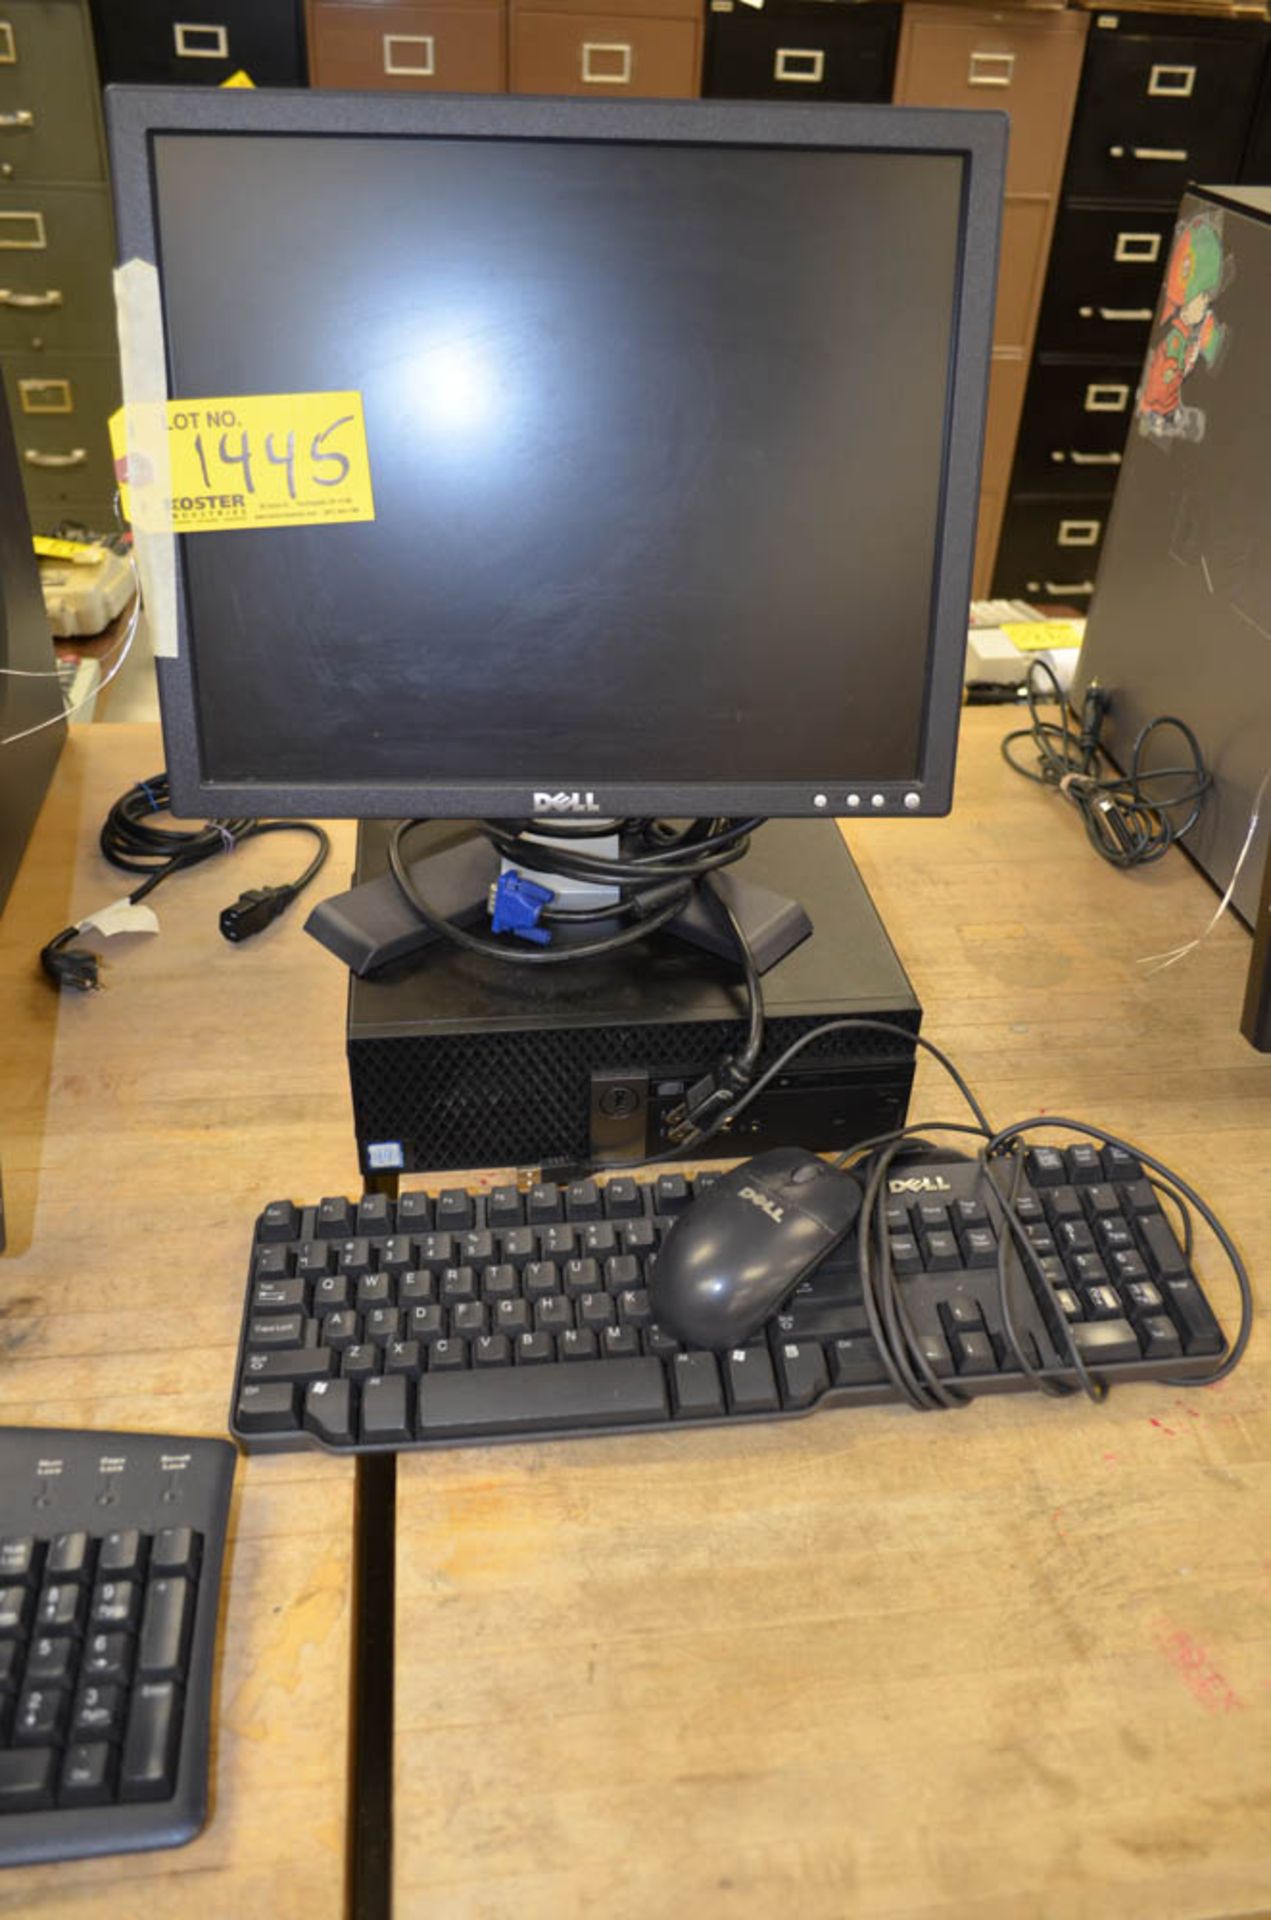 DELL COMPUTER WITH TOWER, MONITOR & KEYBOARD